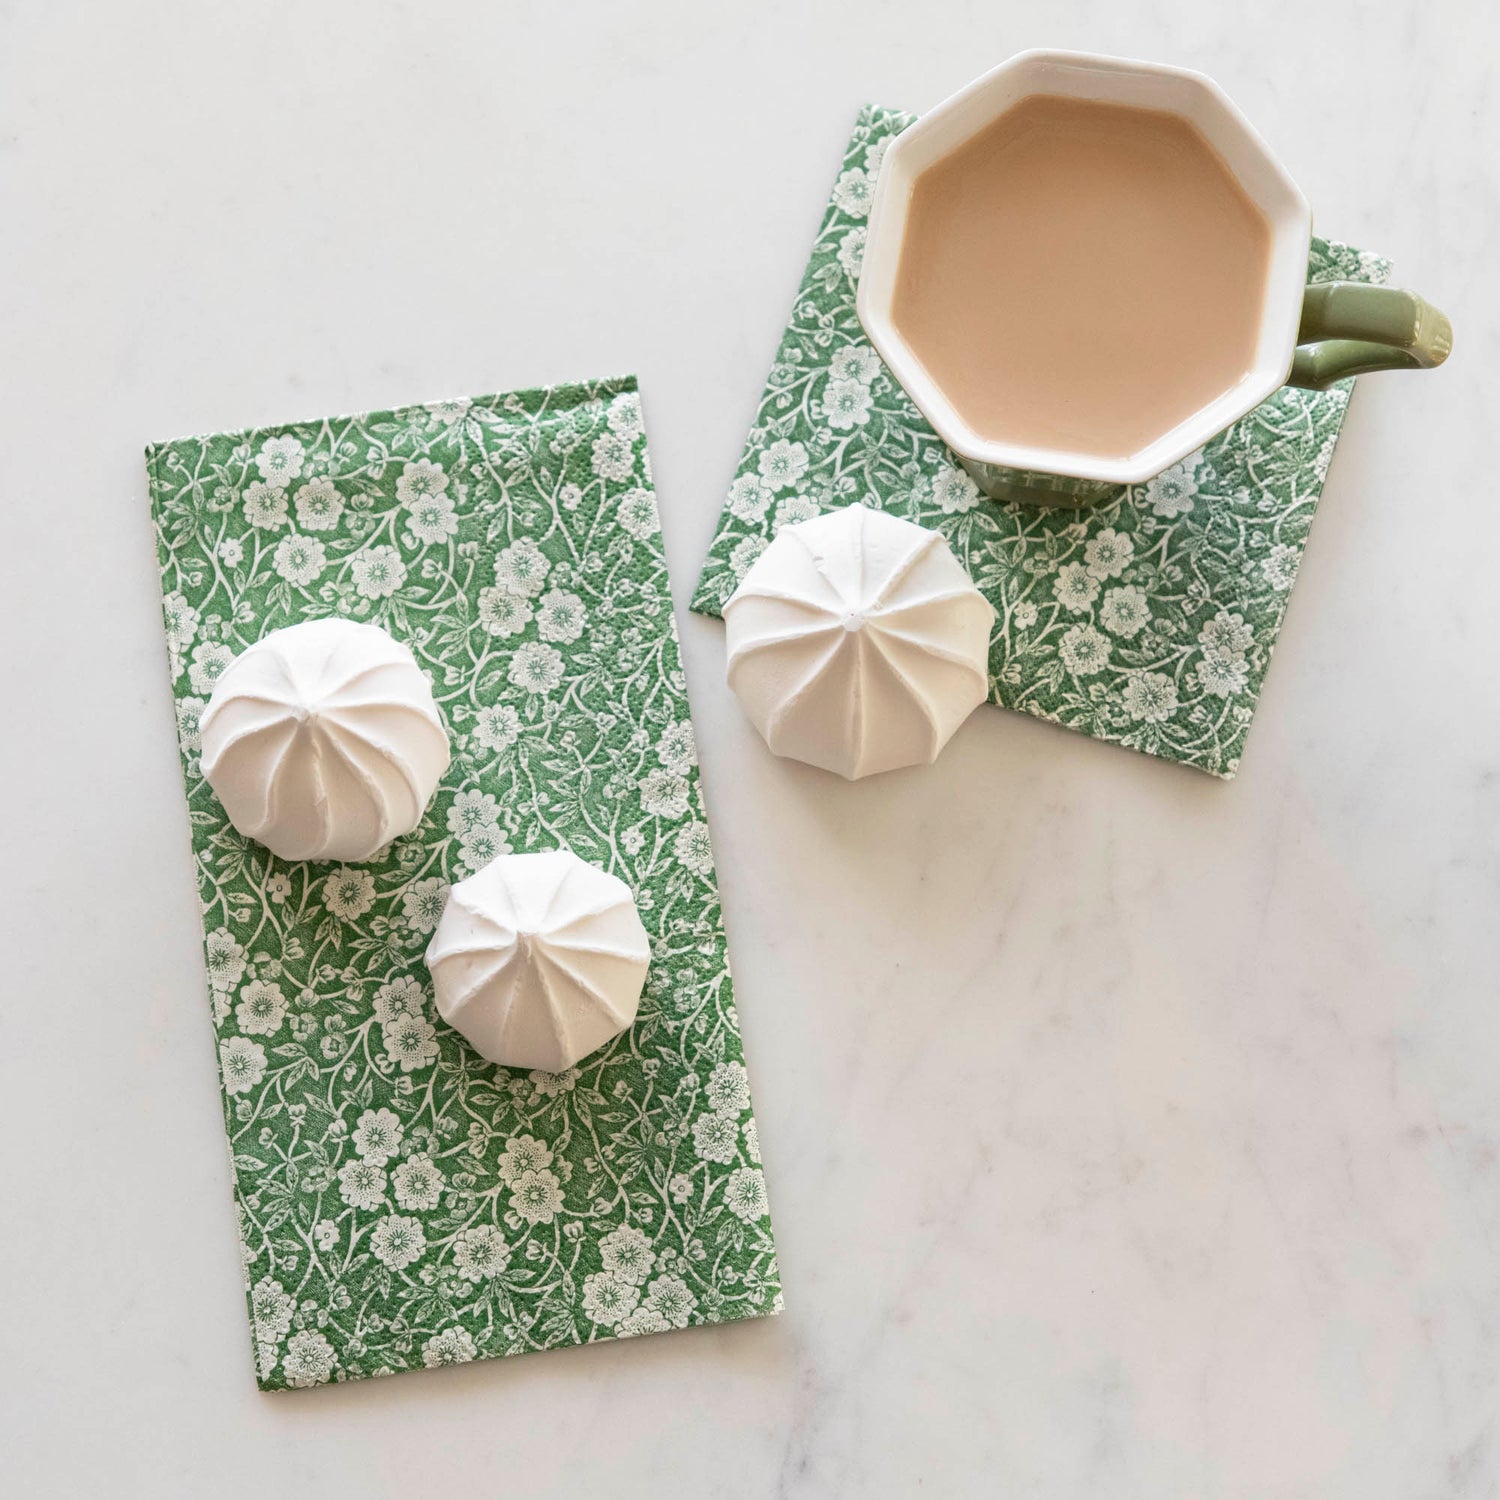 Top-down view of a cup of coffee and marshmallow treats sitting on one Guest and one Cocktail Green Calico Napkin.